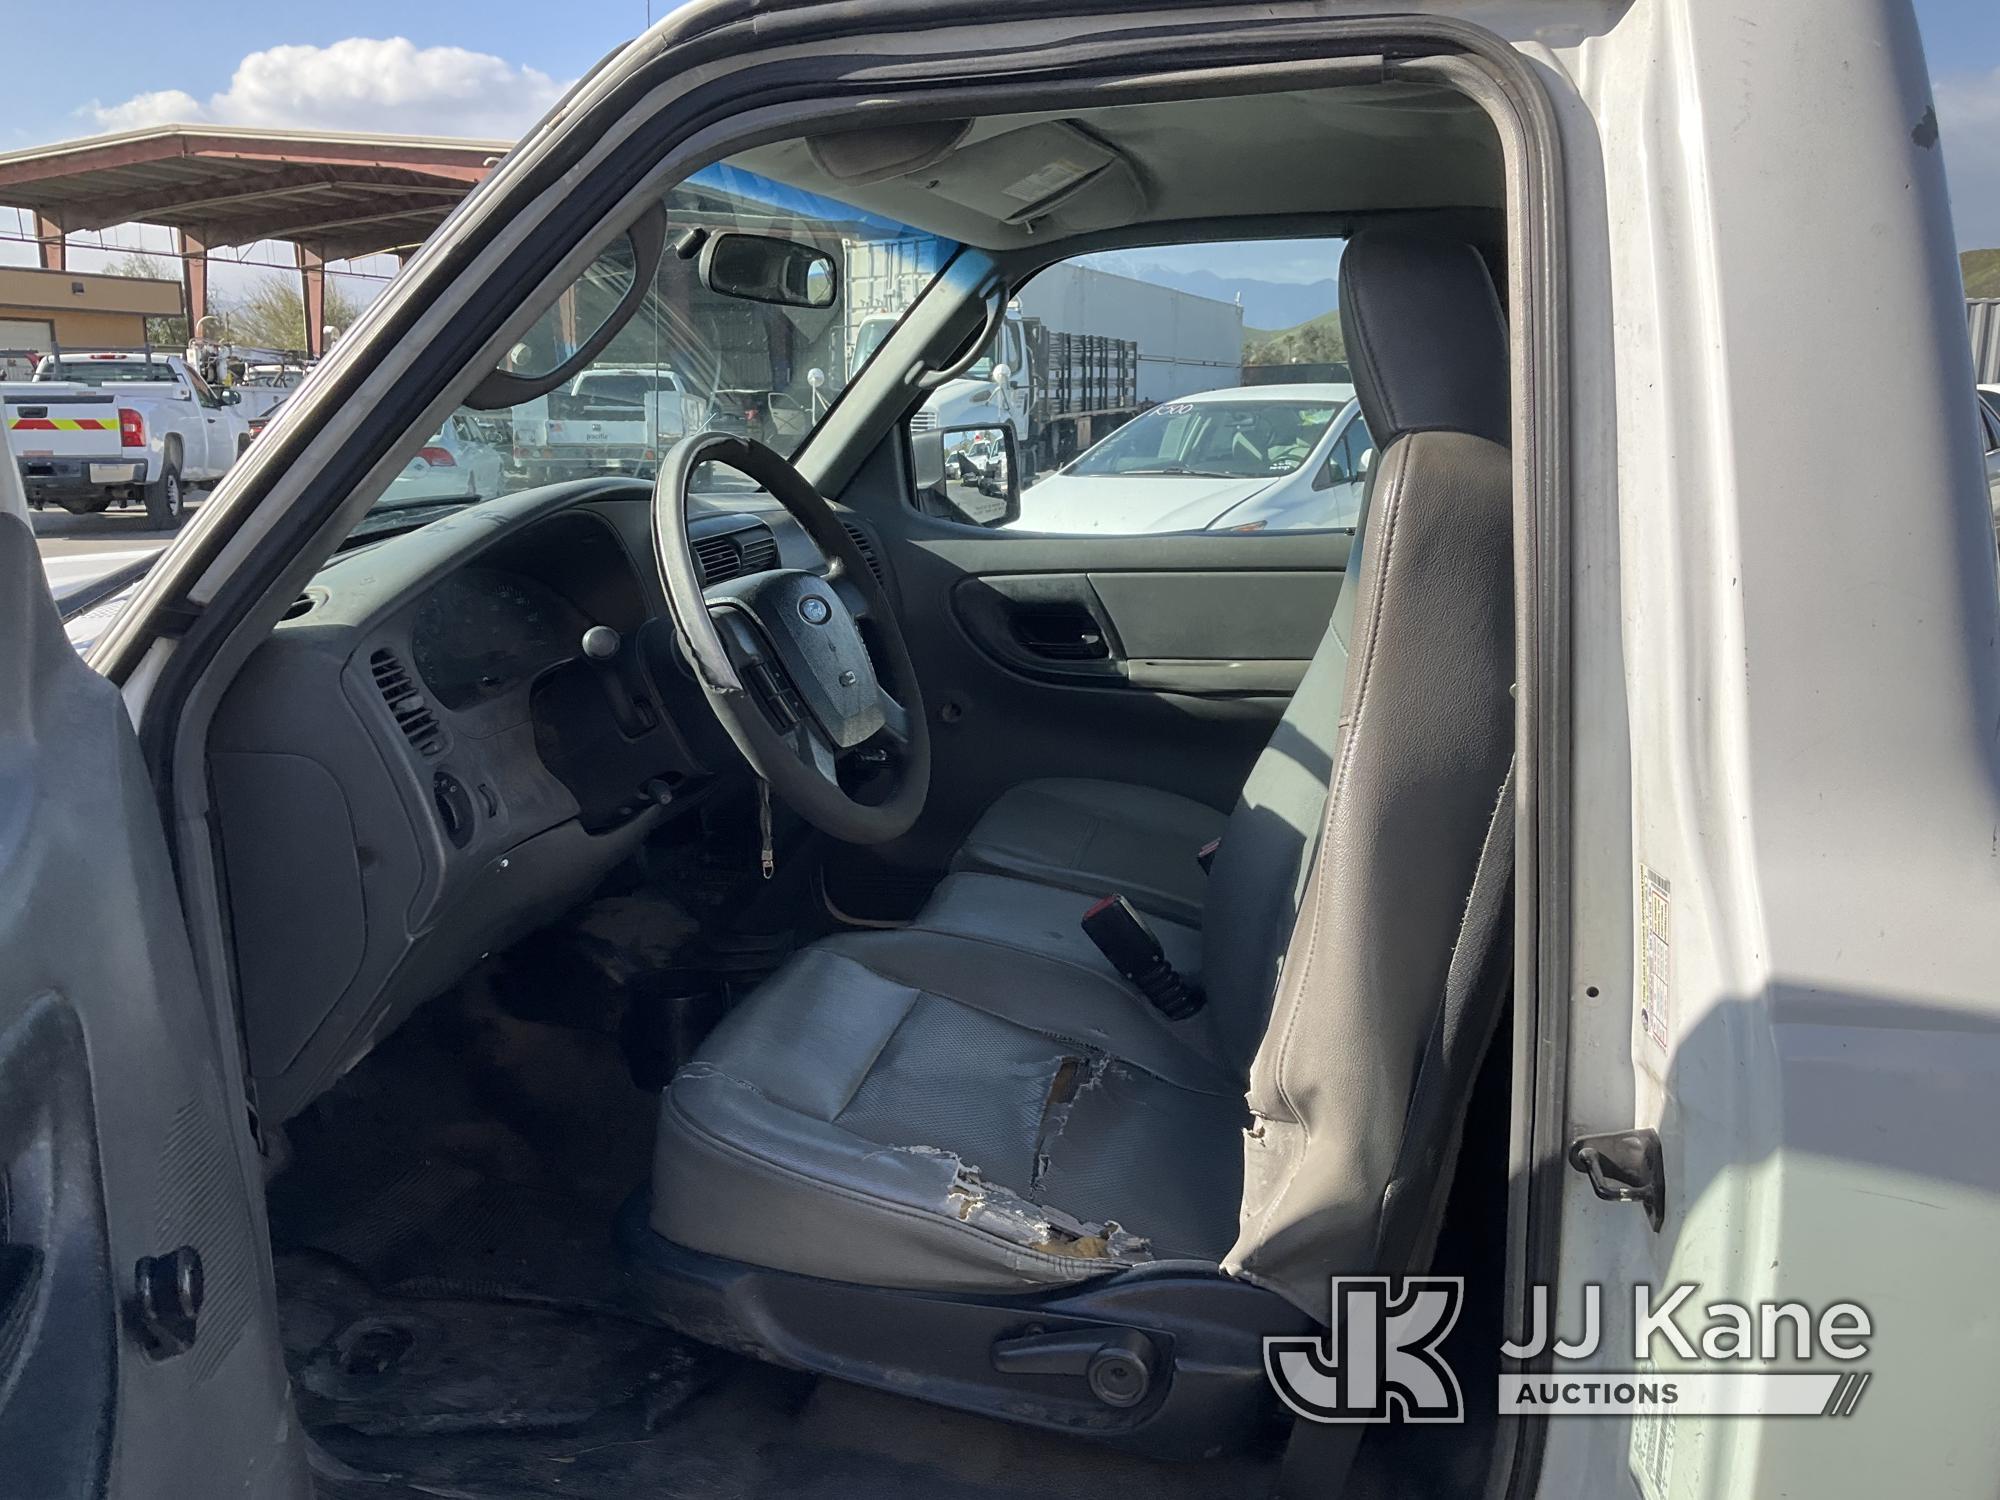 (Jurupa Valley, CA) 2007 Ford Ranger Pickup Truck Runs, Will Not Stay Running Without Jump box, Move